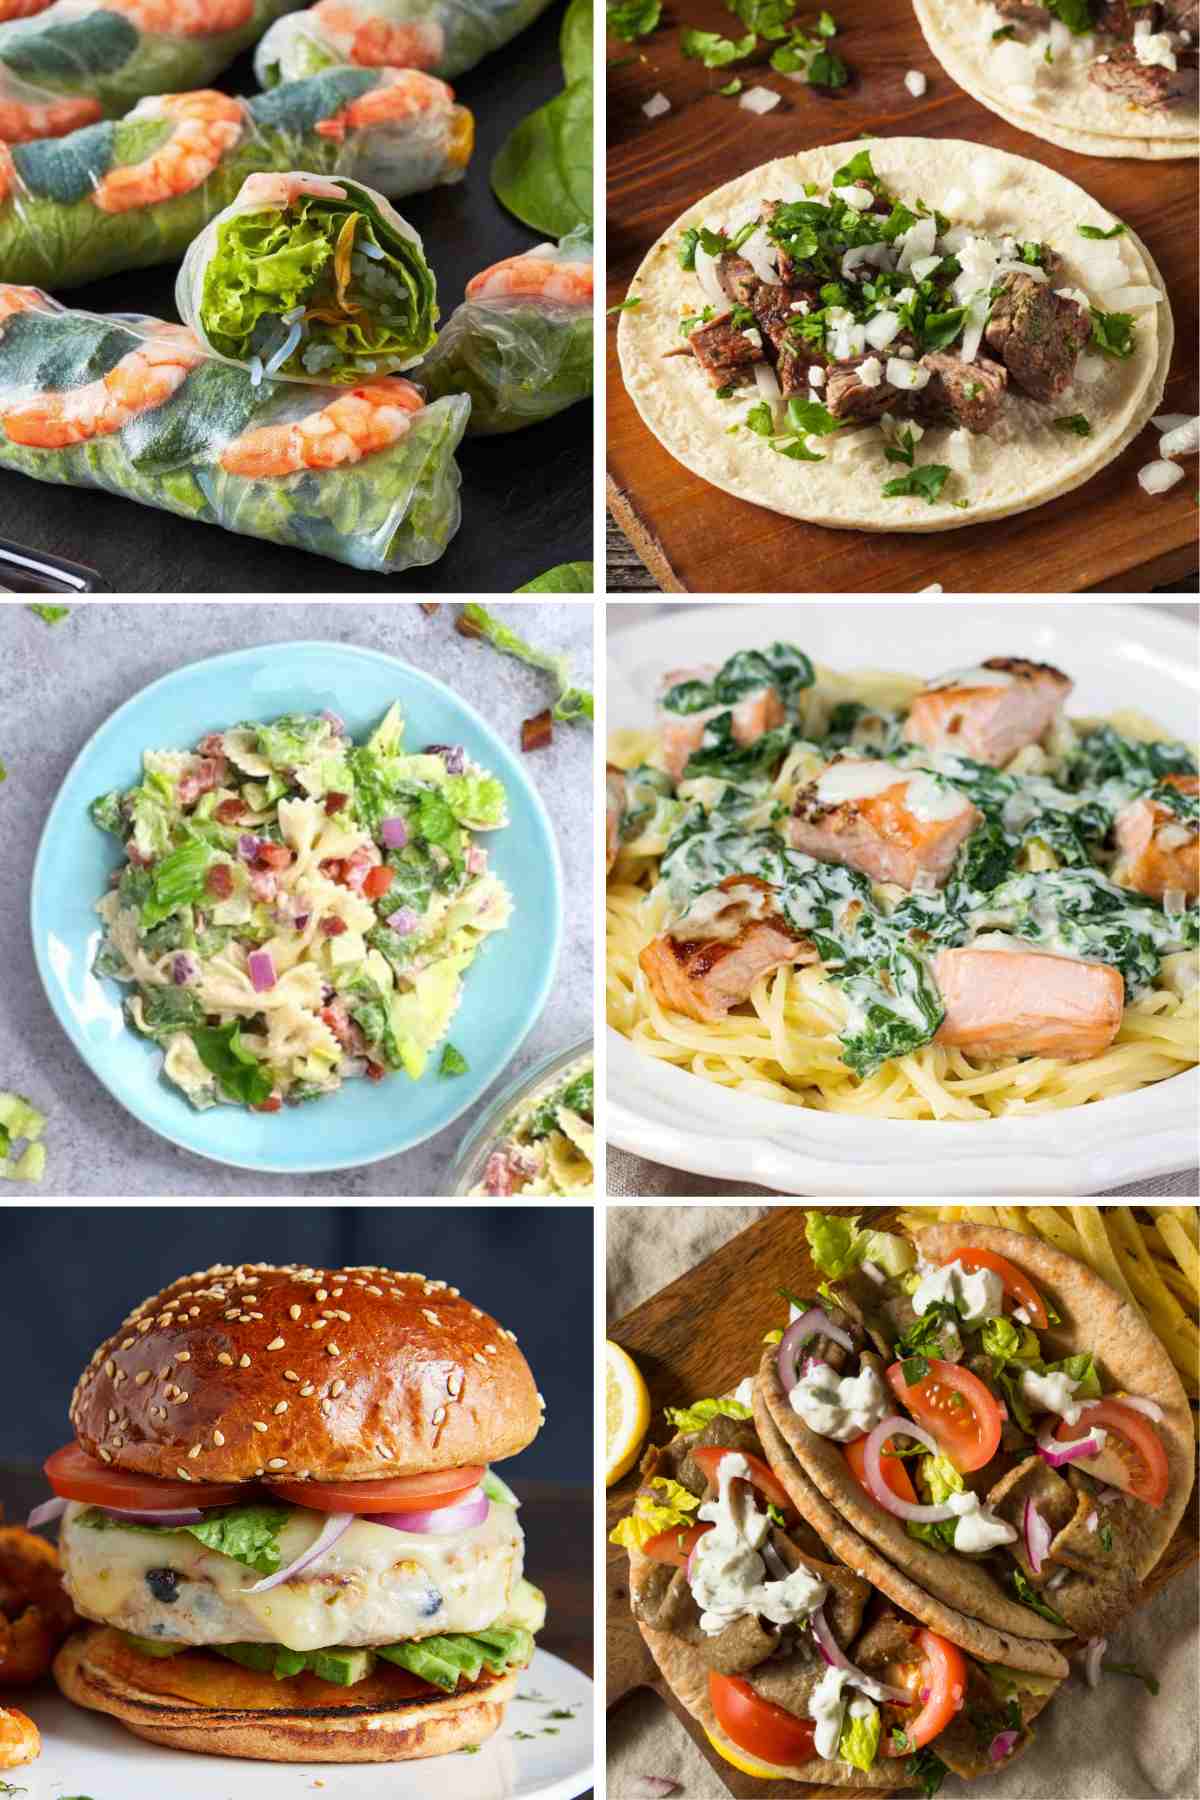 Are you looking for healthy but satisfying meals that will make you feel good? Below you will find some of our favorite Light Dinner Ideas that your family will love. These simple recipes are super simple and fast to make on weekdays. Go on, give them a try tonight, you’re promised delicious meals with incredible results!!